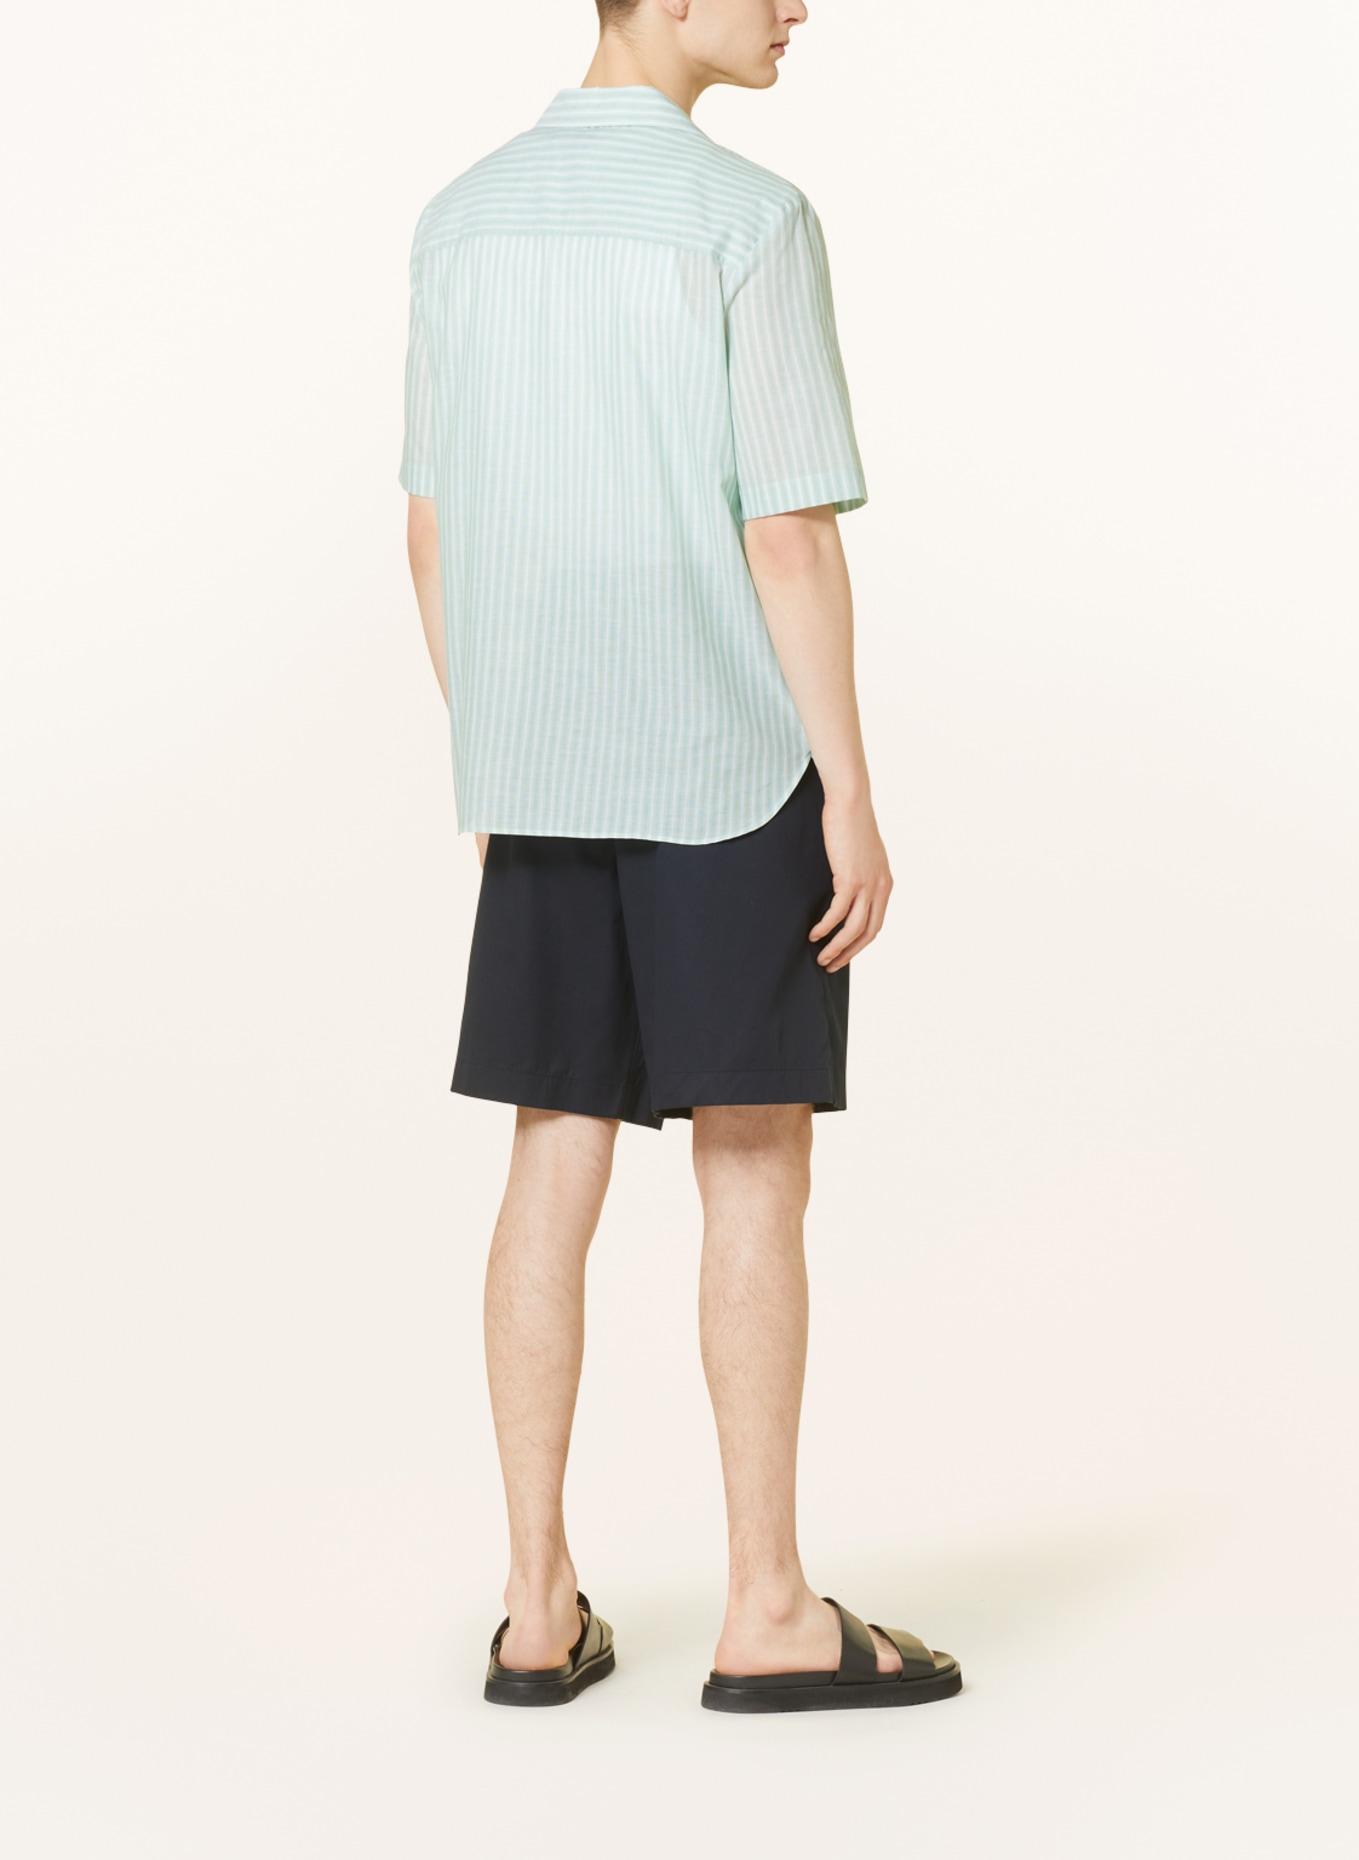 COS Short sleeve shirt relaxed fit, Color: LIGHT GREEN/ WHITE (Image 3)